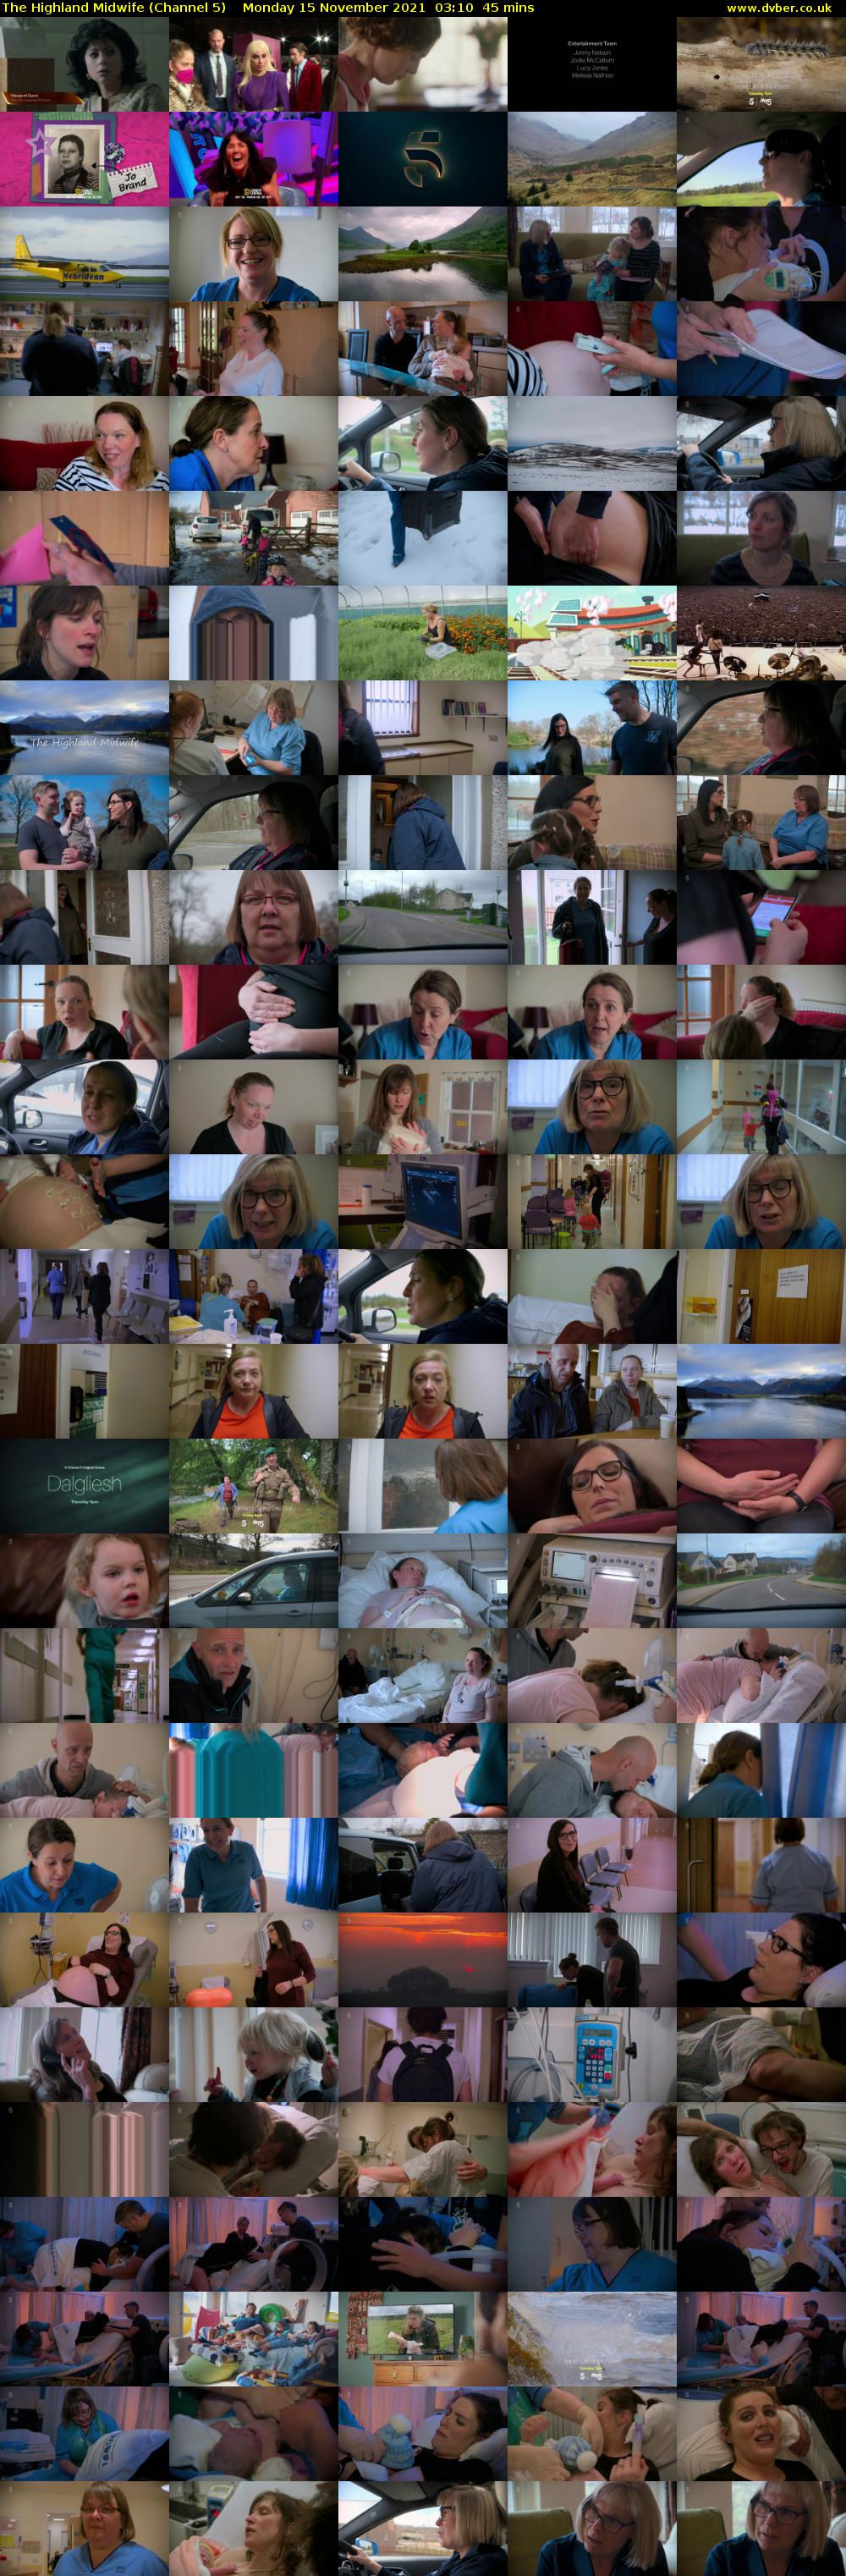 The Highland Midwife (Channel 5) Monday 15 November 2021 03:10 - 03:55